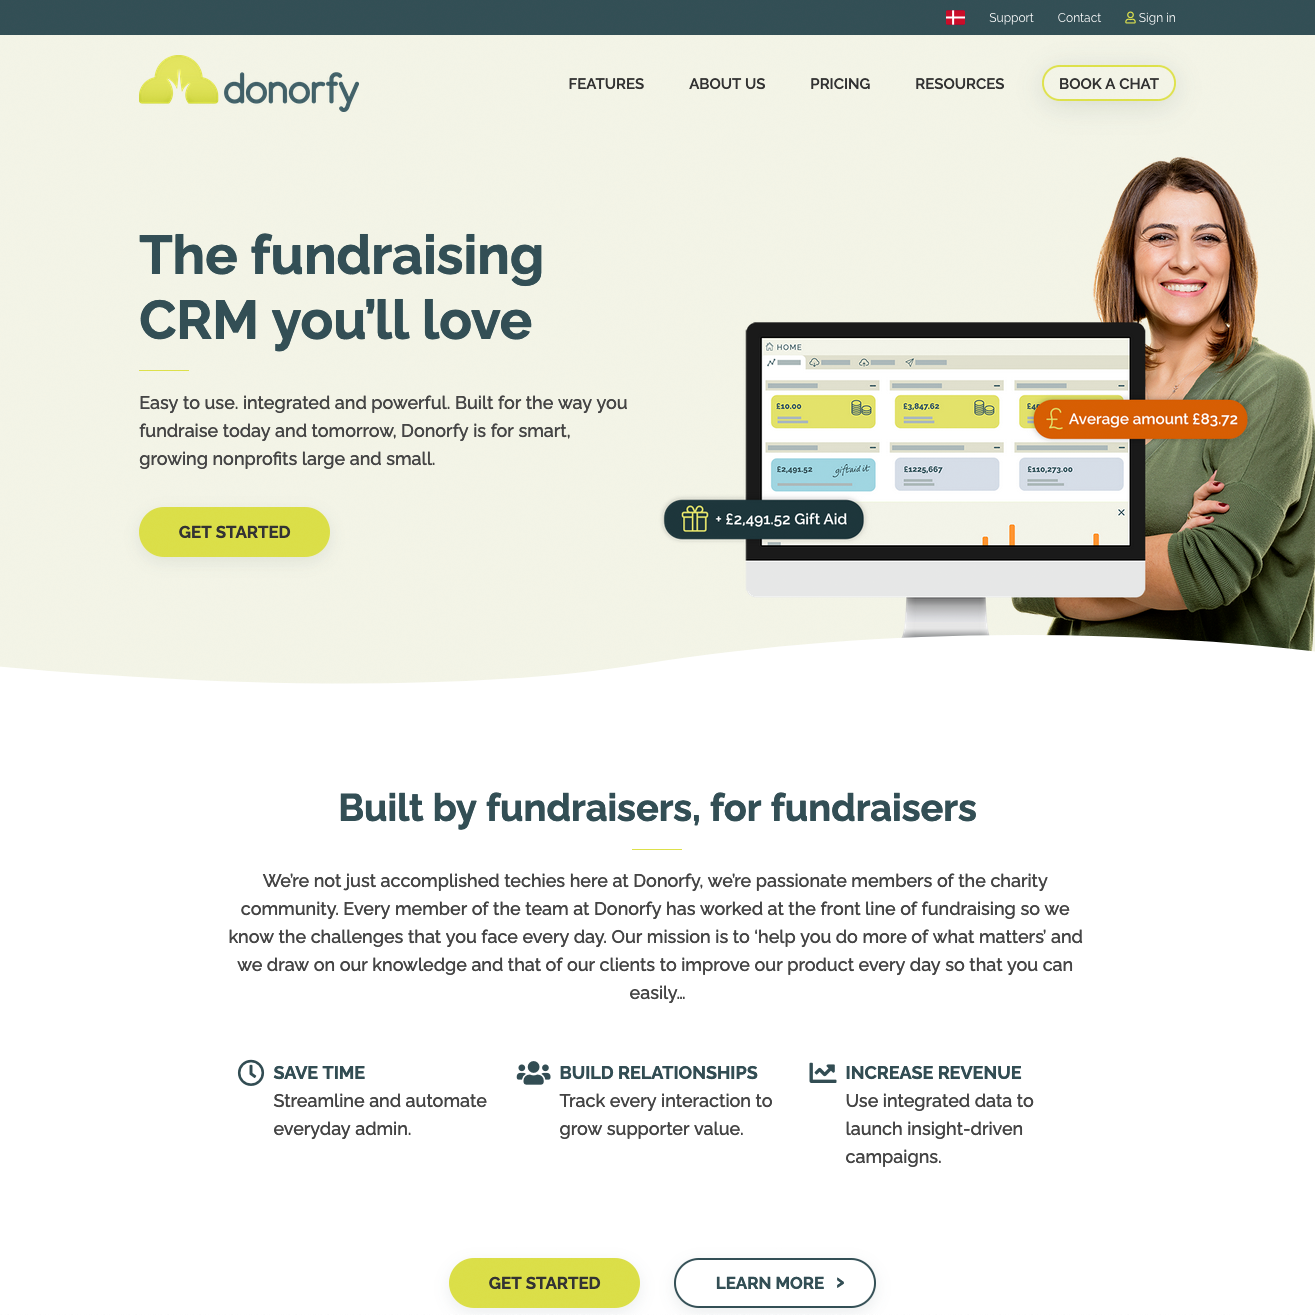 Donorfy